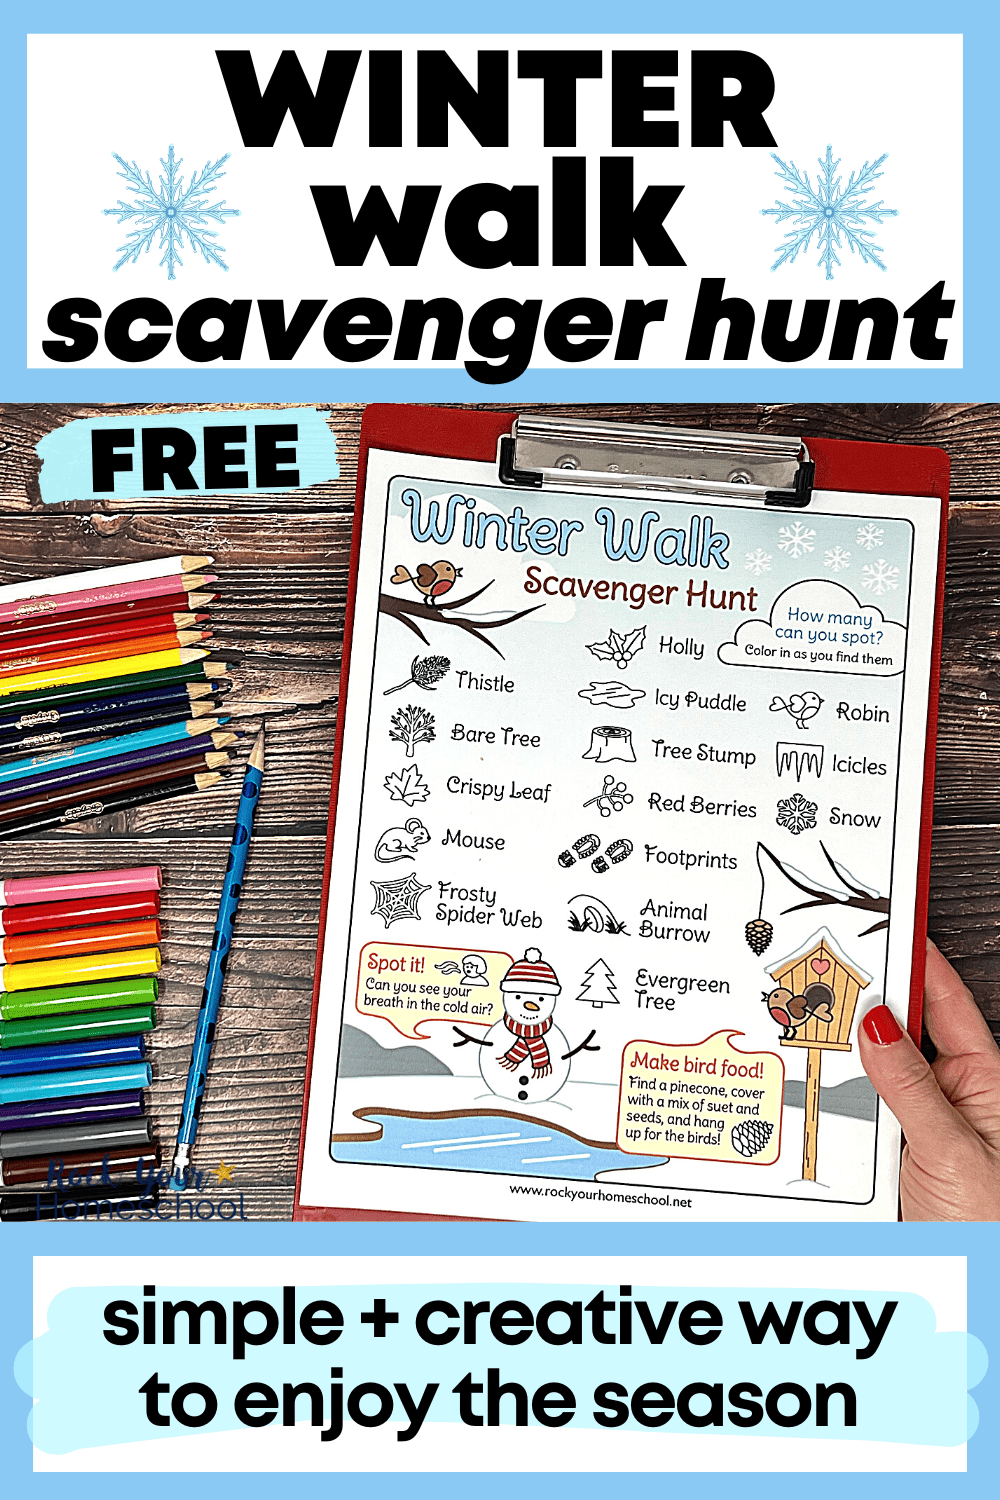 woman holding red clipboard with free printable winter walk scavenger hunt activity with rainbow of markers and color pencils on wood background